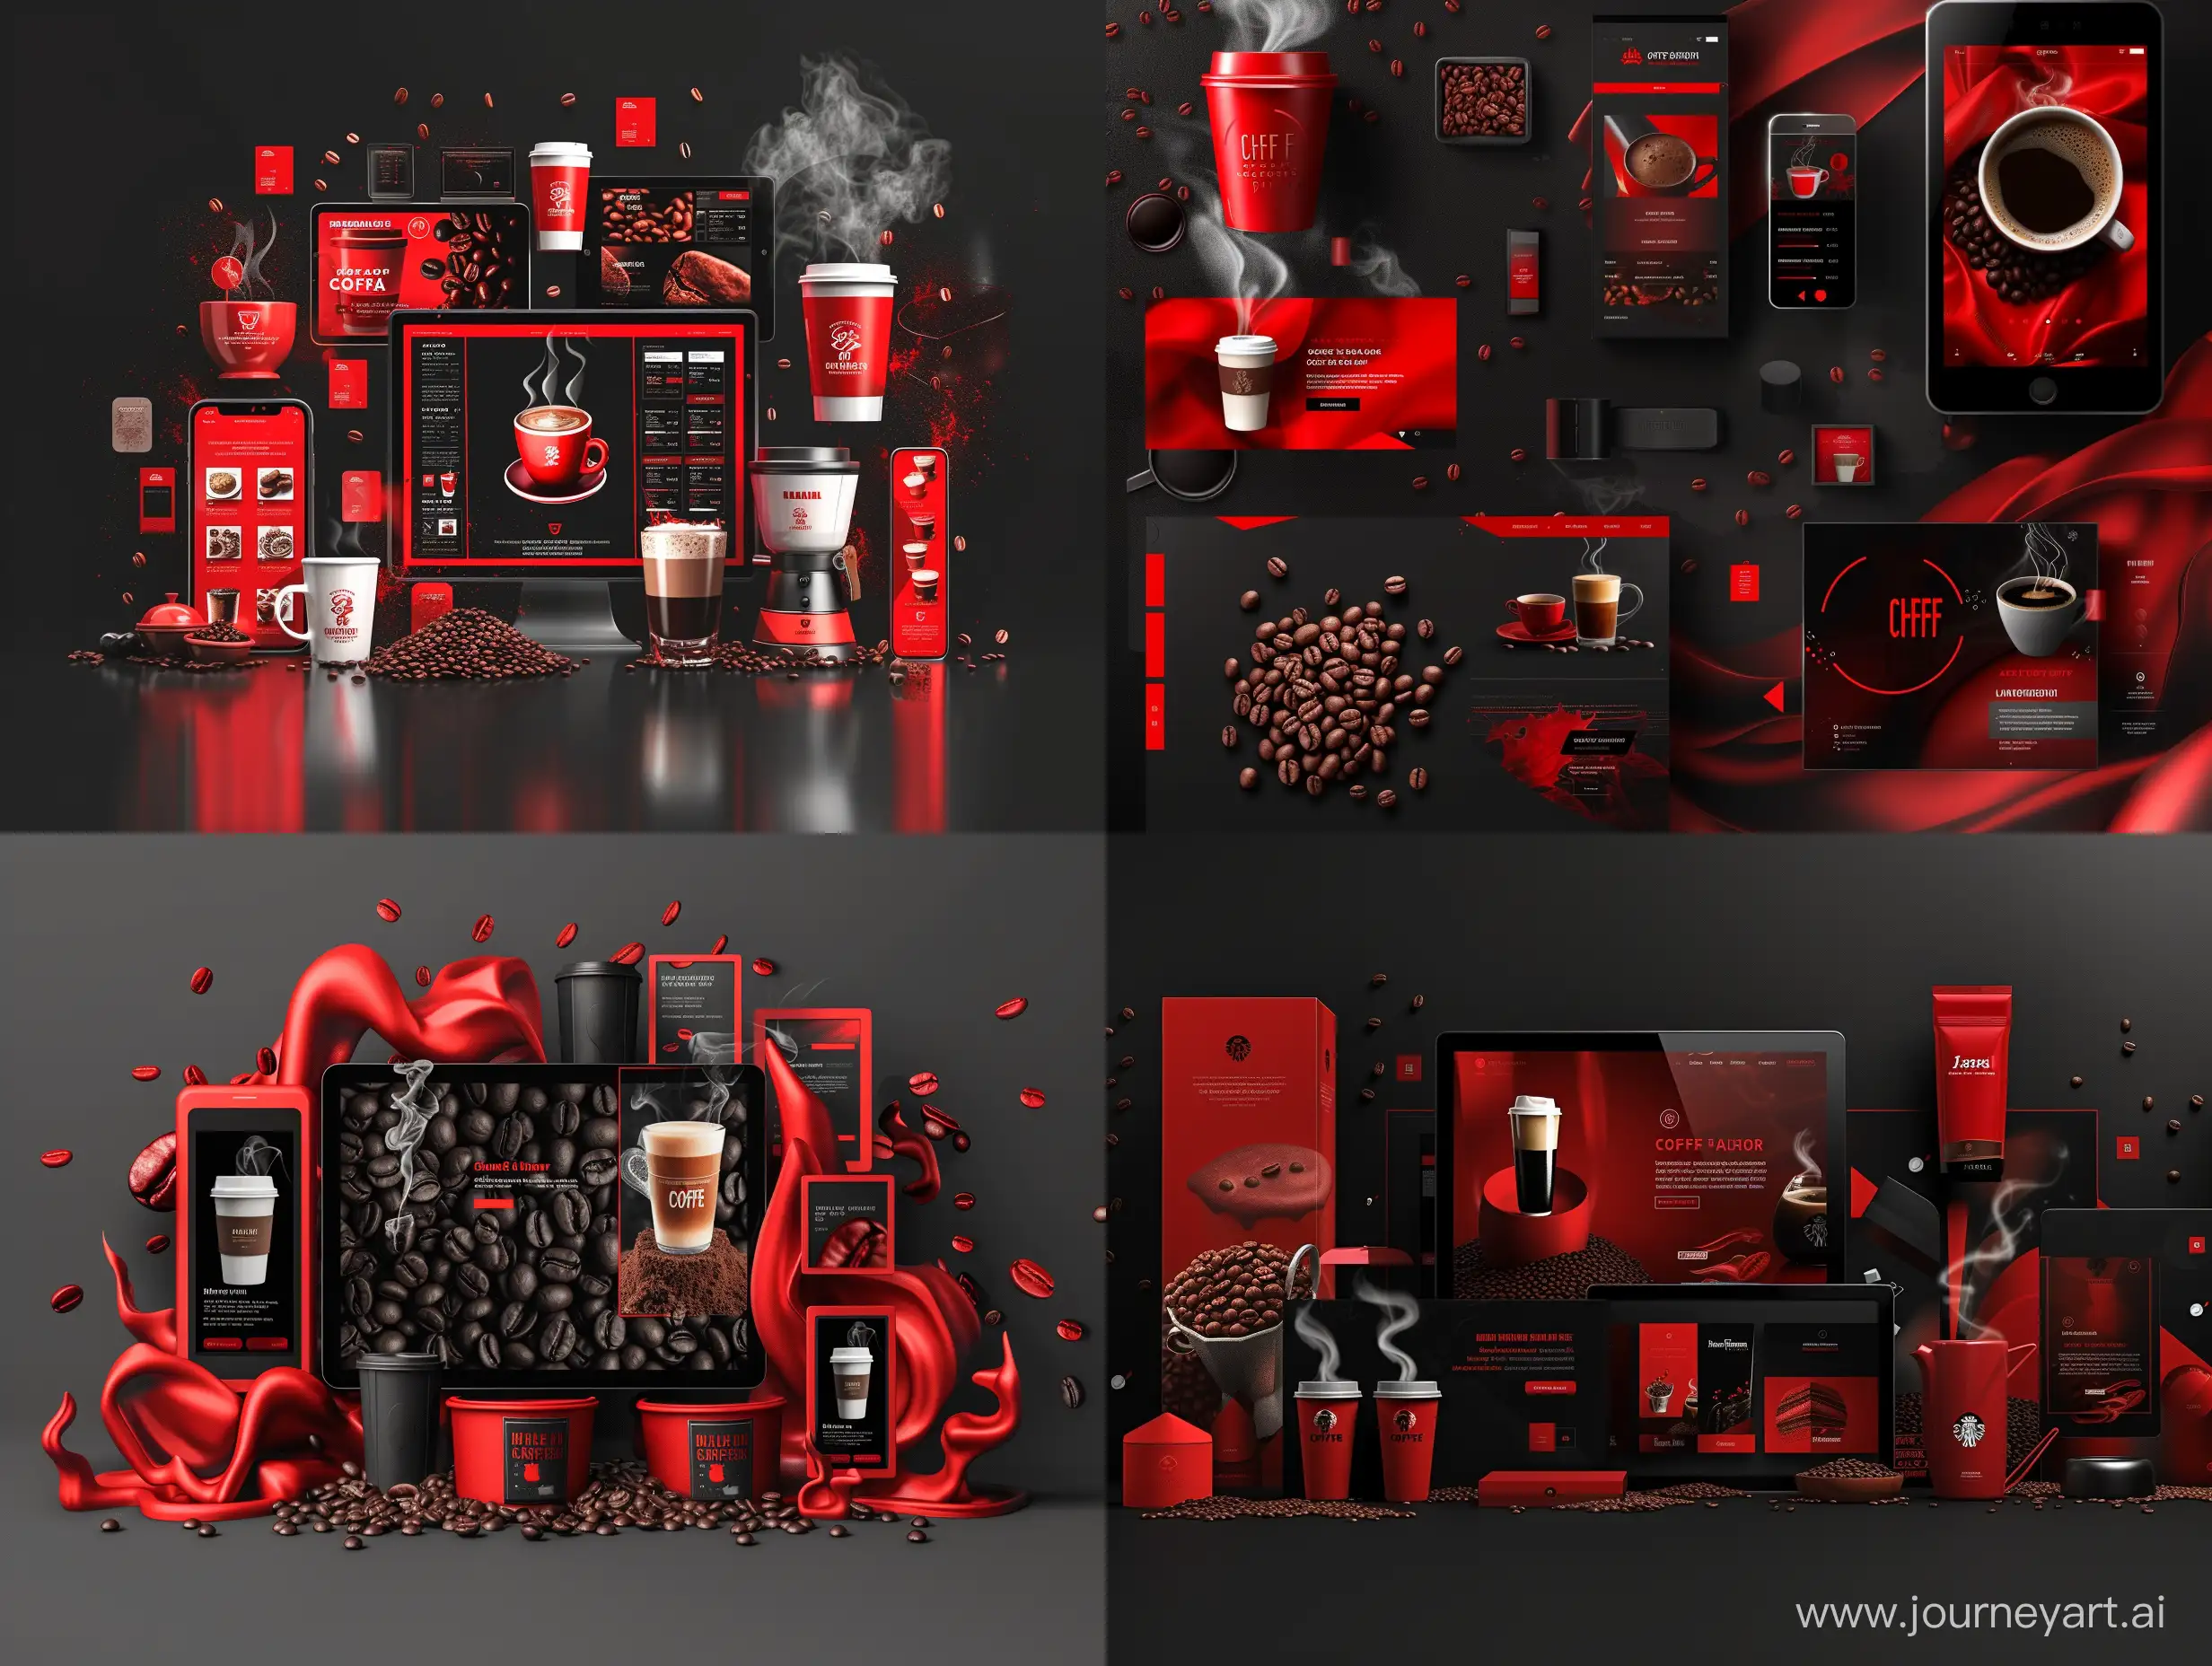 Modern-Digital-Coffee-Advertisement-Red-and-Black-Design-with-Steaming-Cups